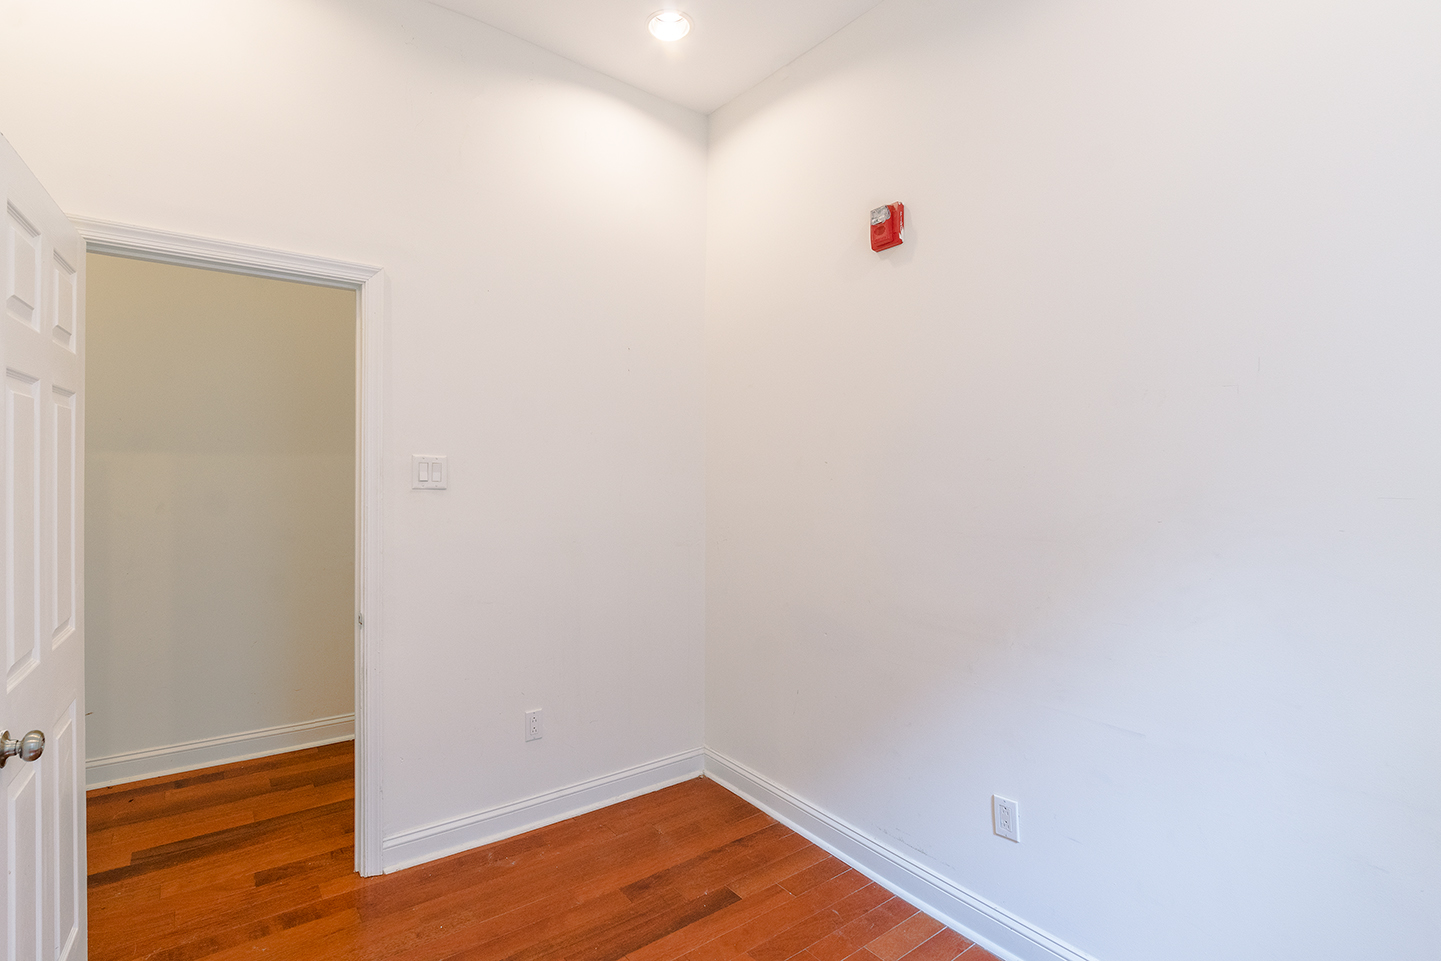 Property Photo For 1633 W Girard Ave, Unit 2R